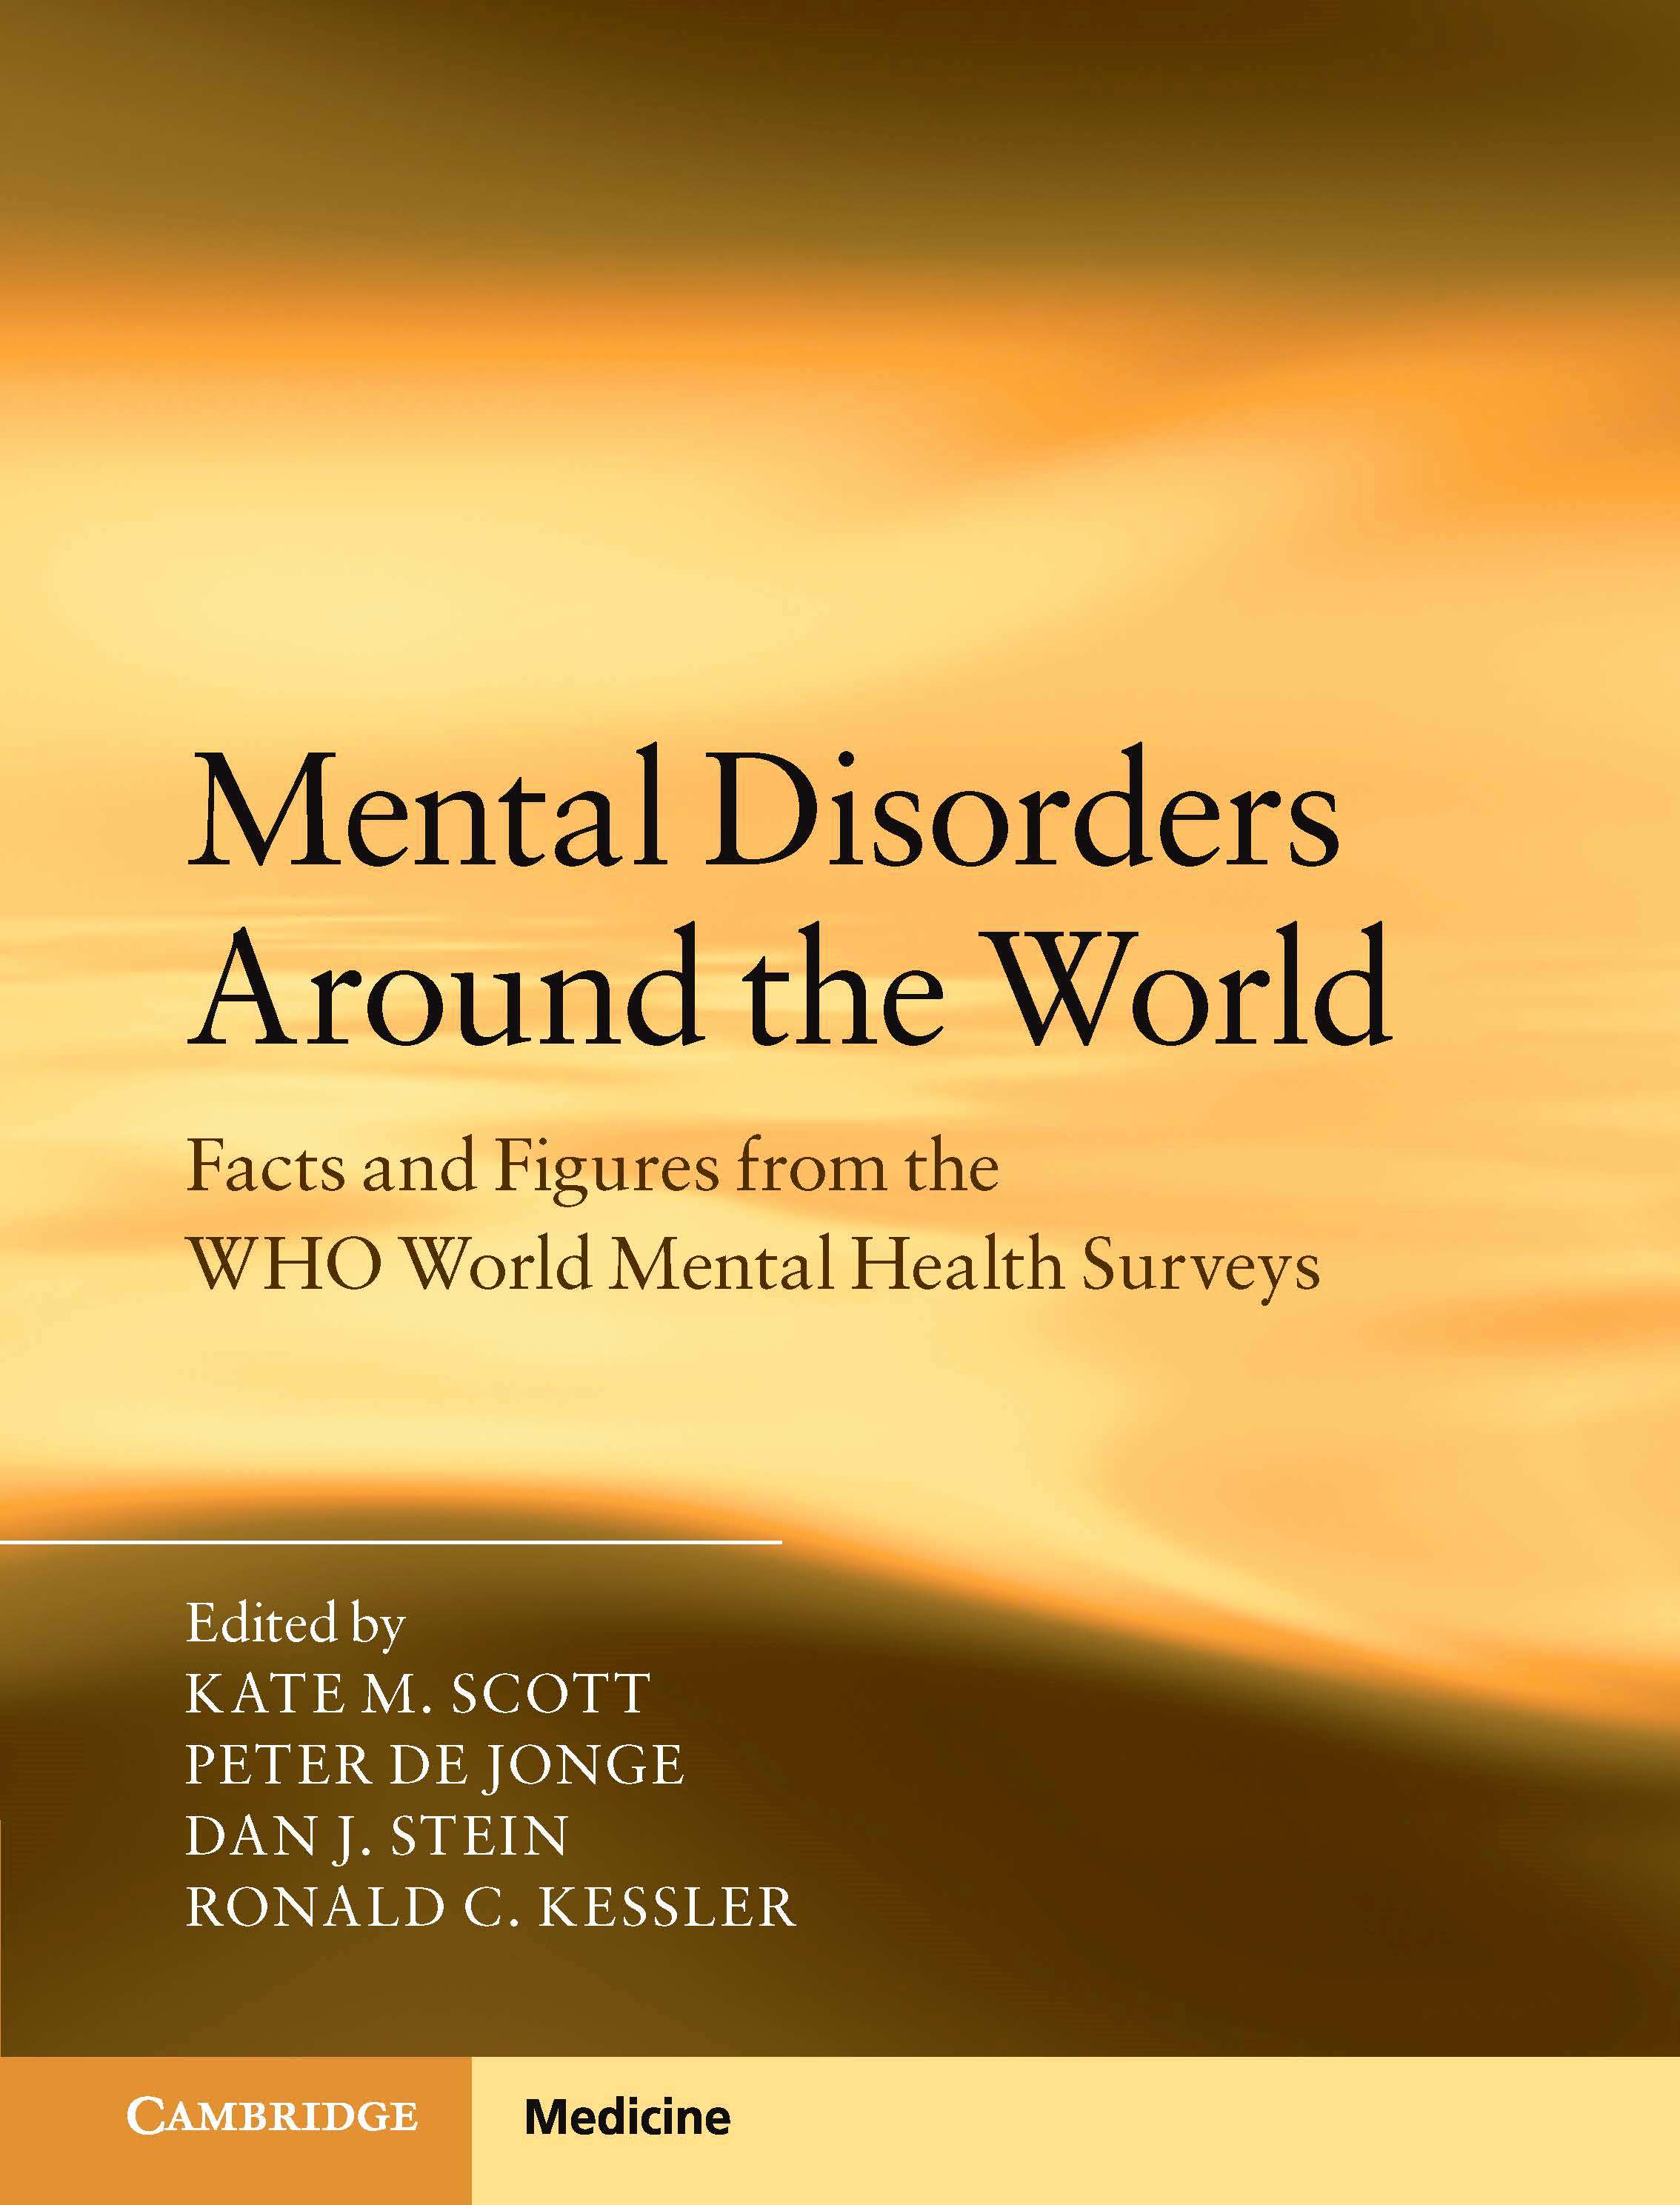 Mental Disorders around the World:
		Facts and Figures from the WHO World Mental Health Surveys